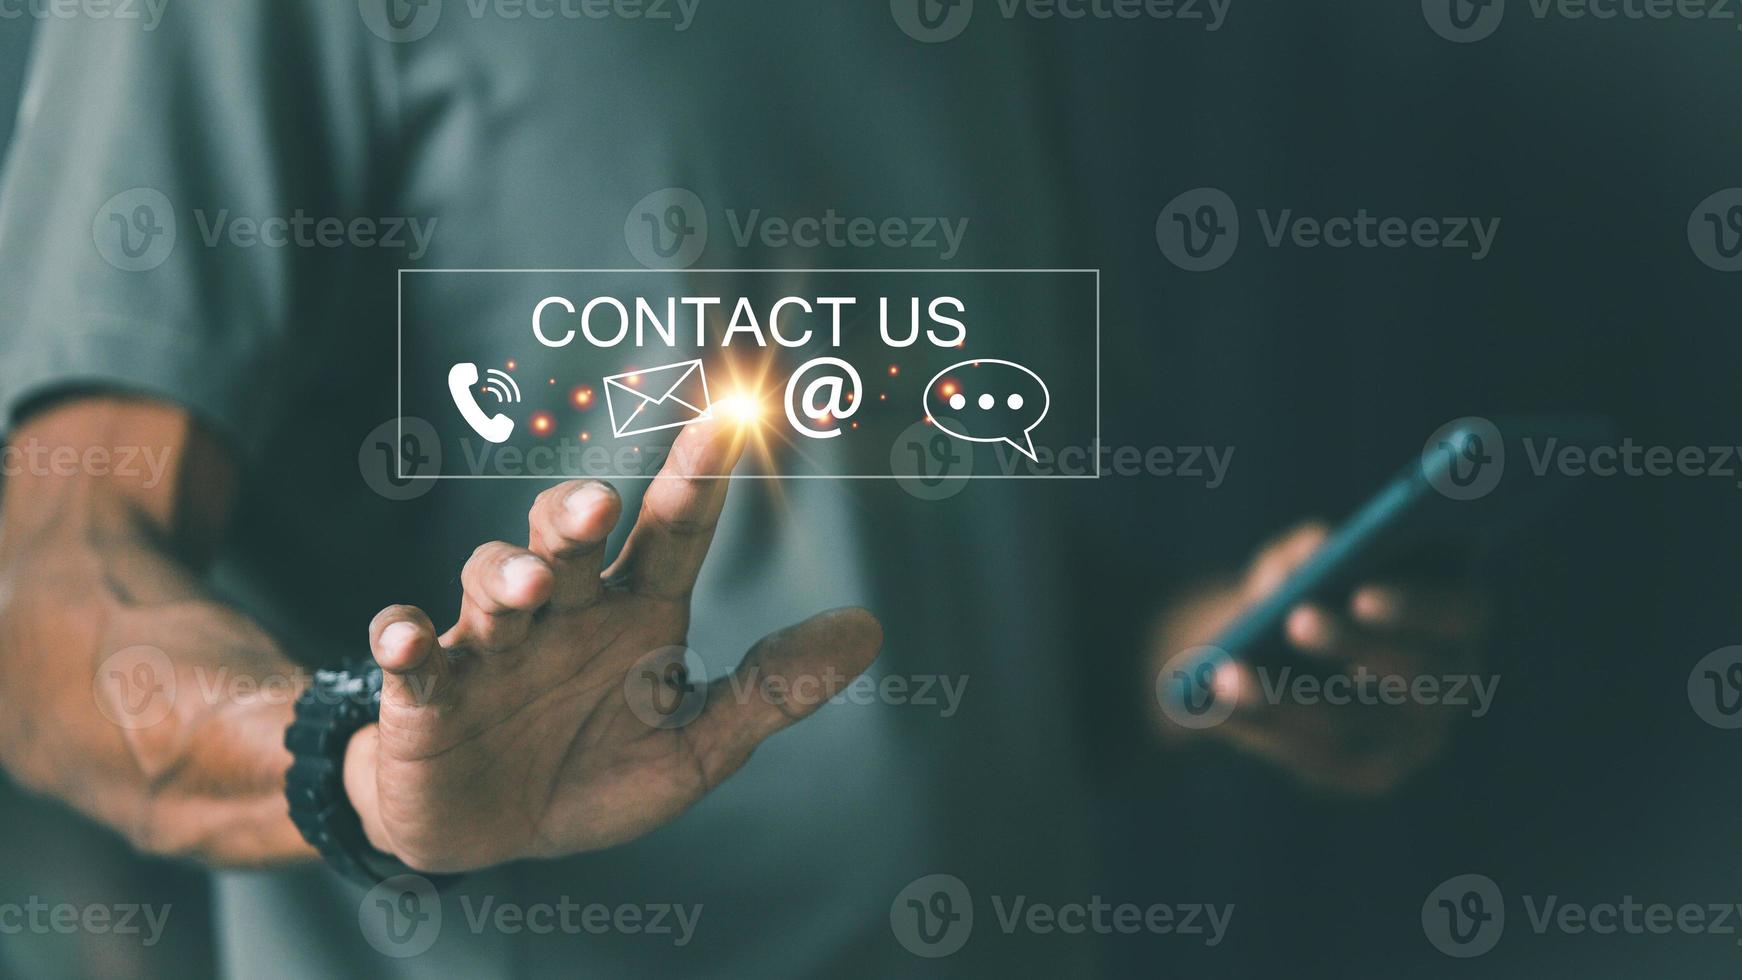 Contact us or Customer support hotline people connect. Businessman using smart phone and touching on virtual screen contact icons email, telephone, address, live chat, photo